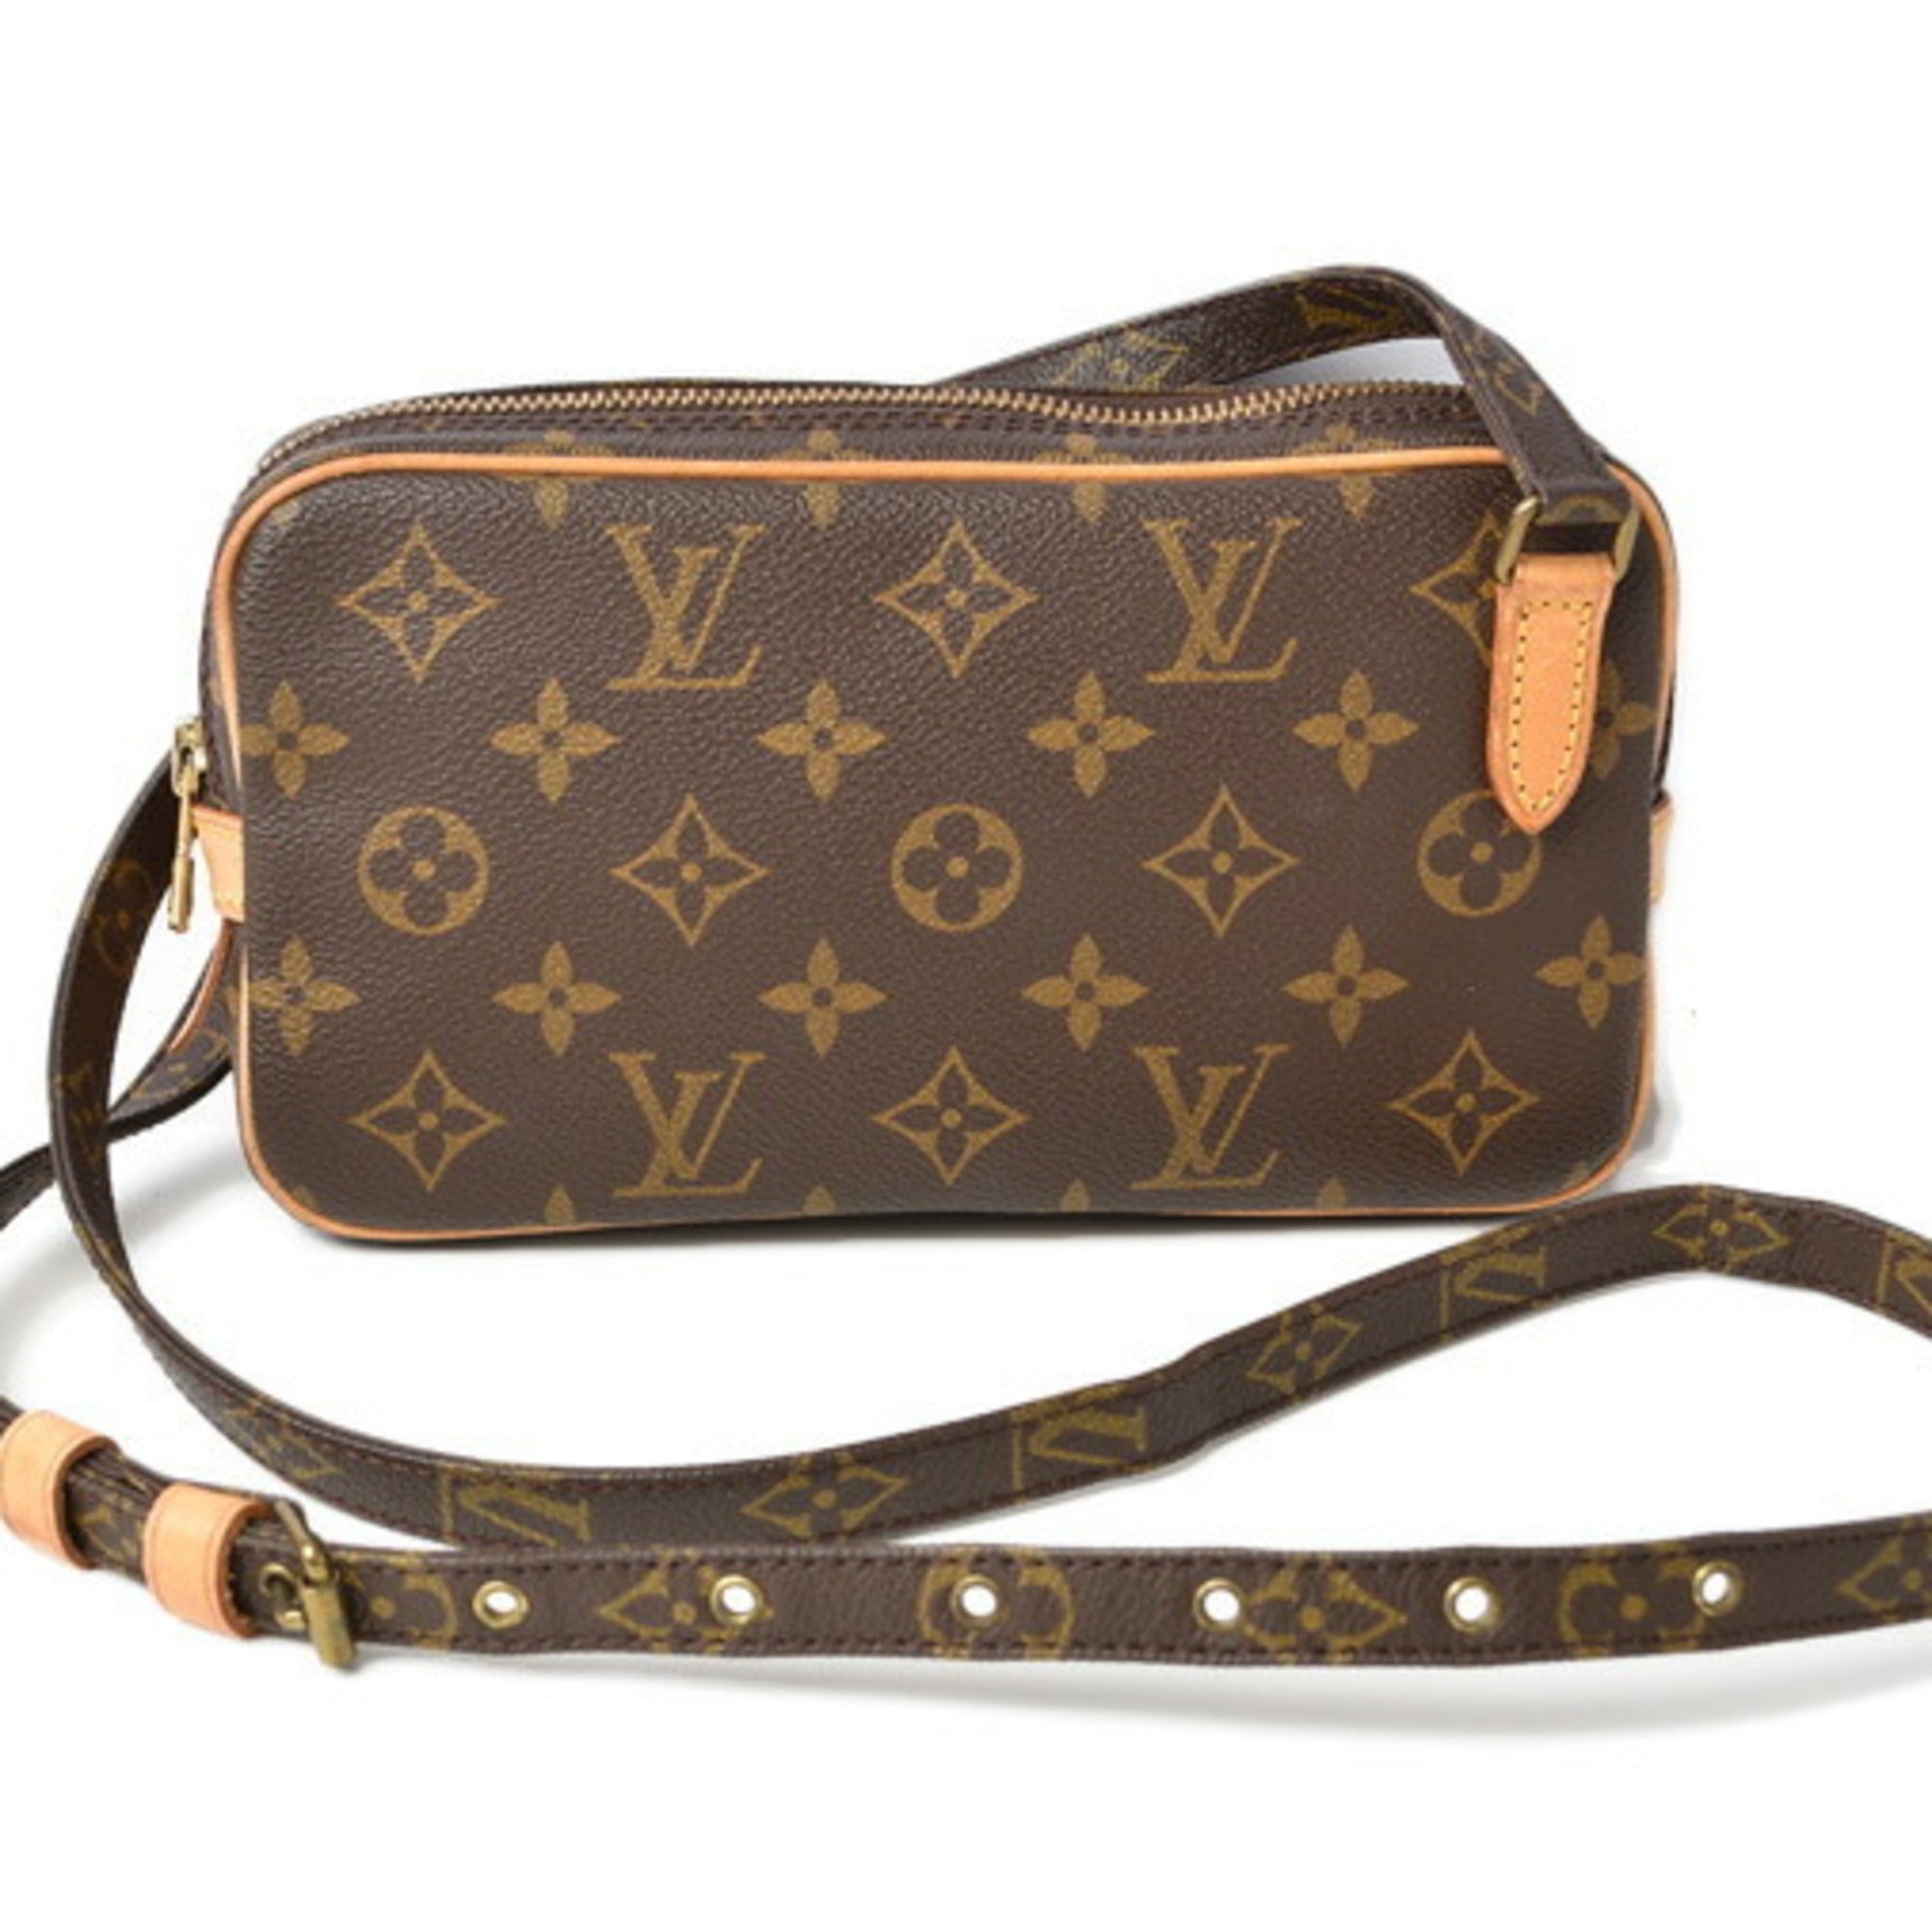 Auth Louis Vuitton Monogram Pochette Marly Bandouliere M51828 Used